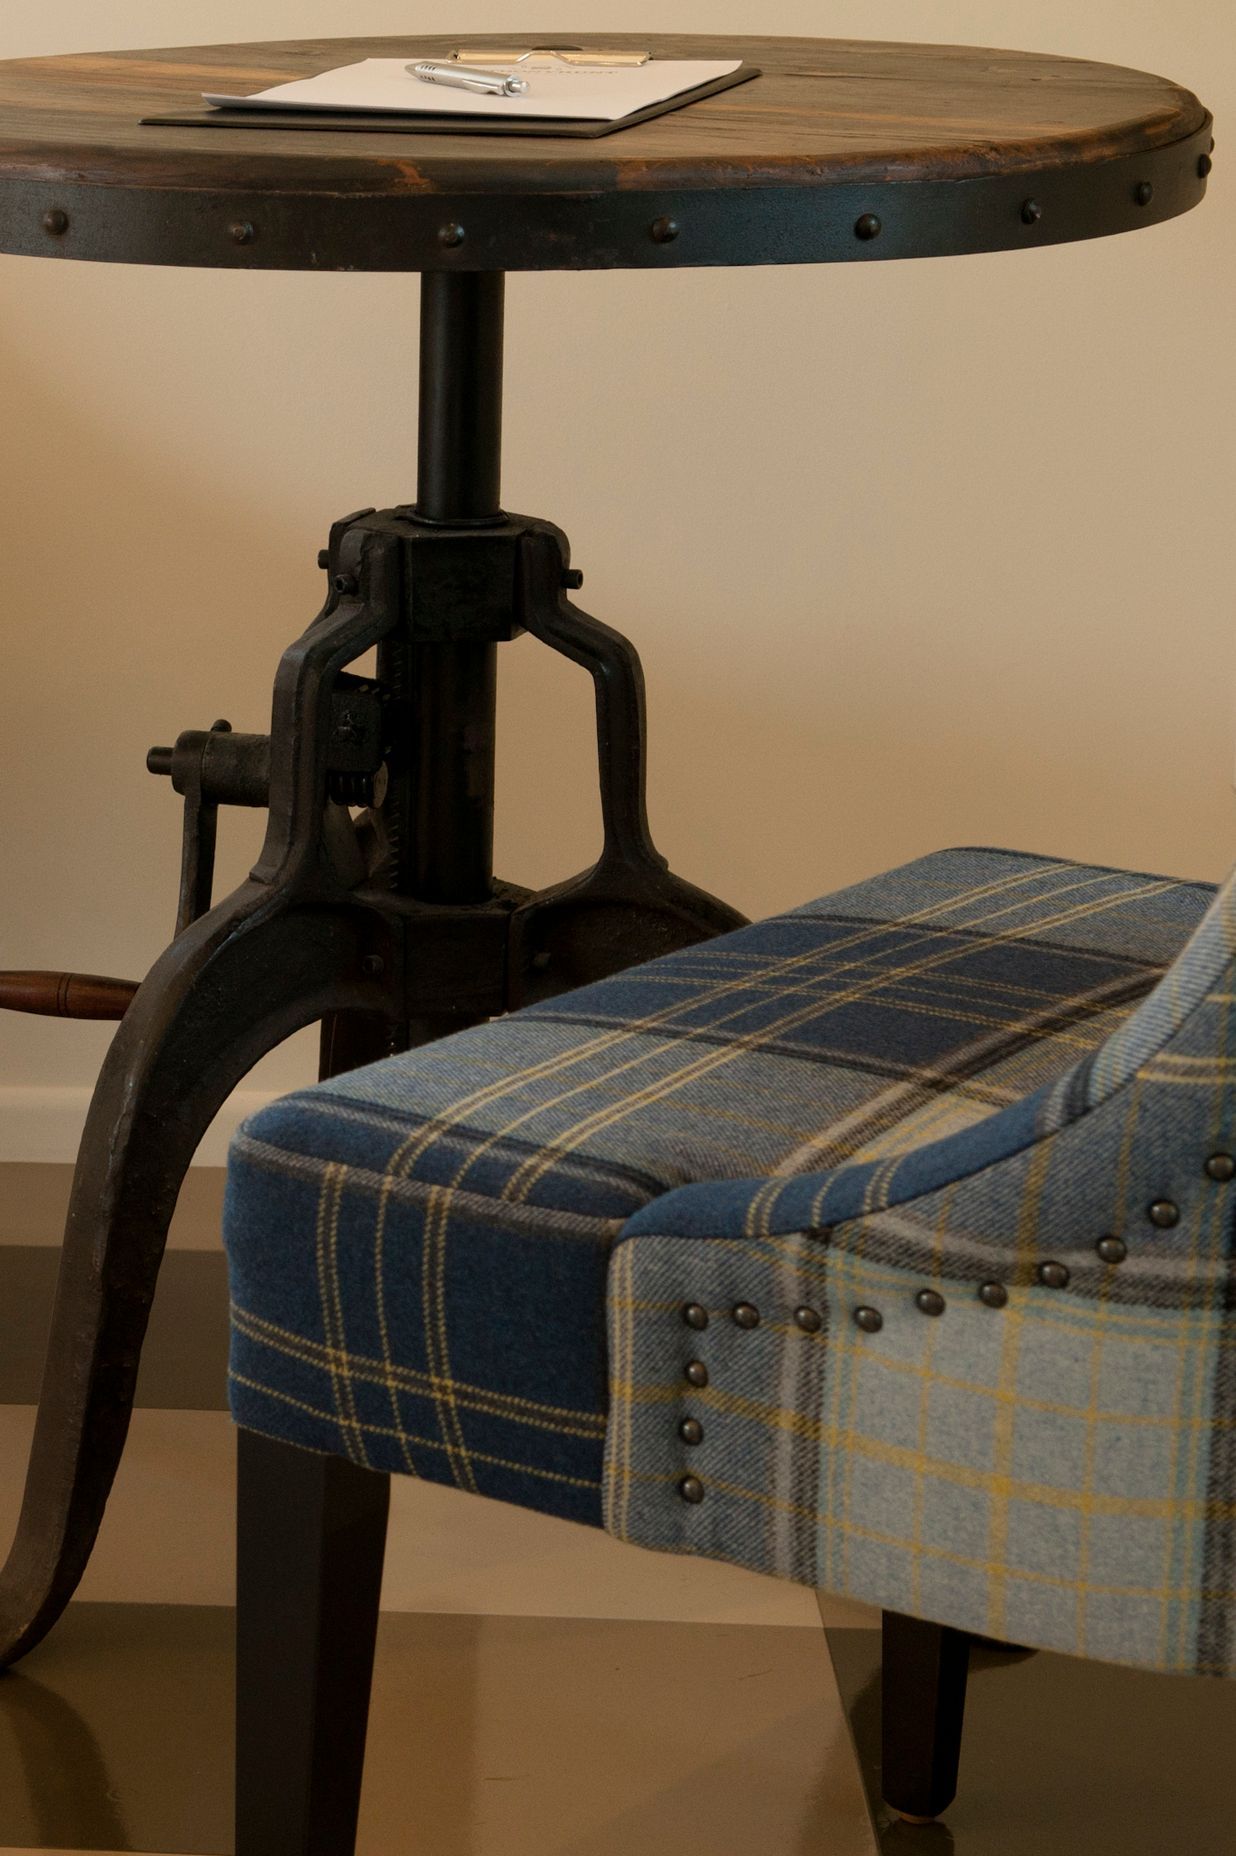 Leather, tartan, Donegal tweed upholstered furniture, and industrial tables are not mainstream